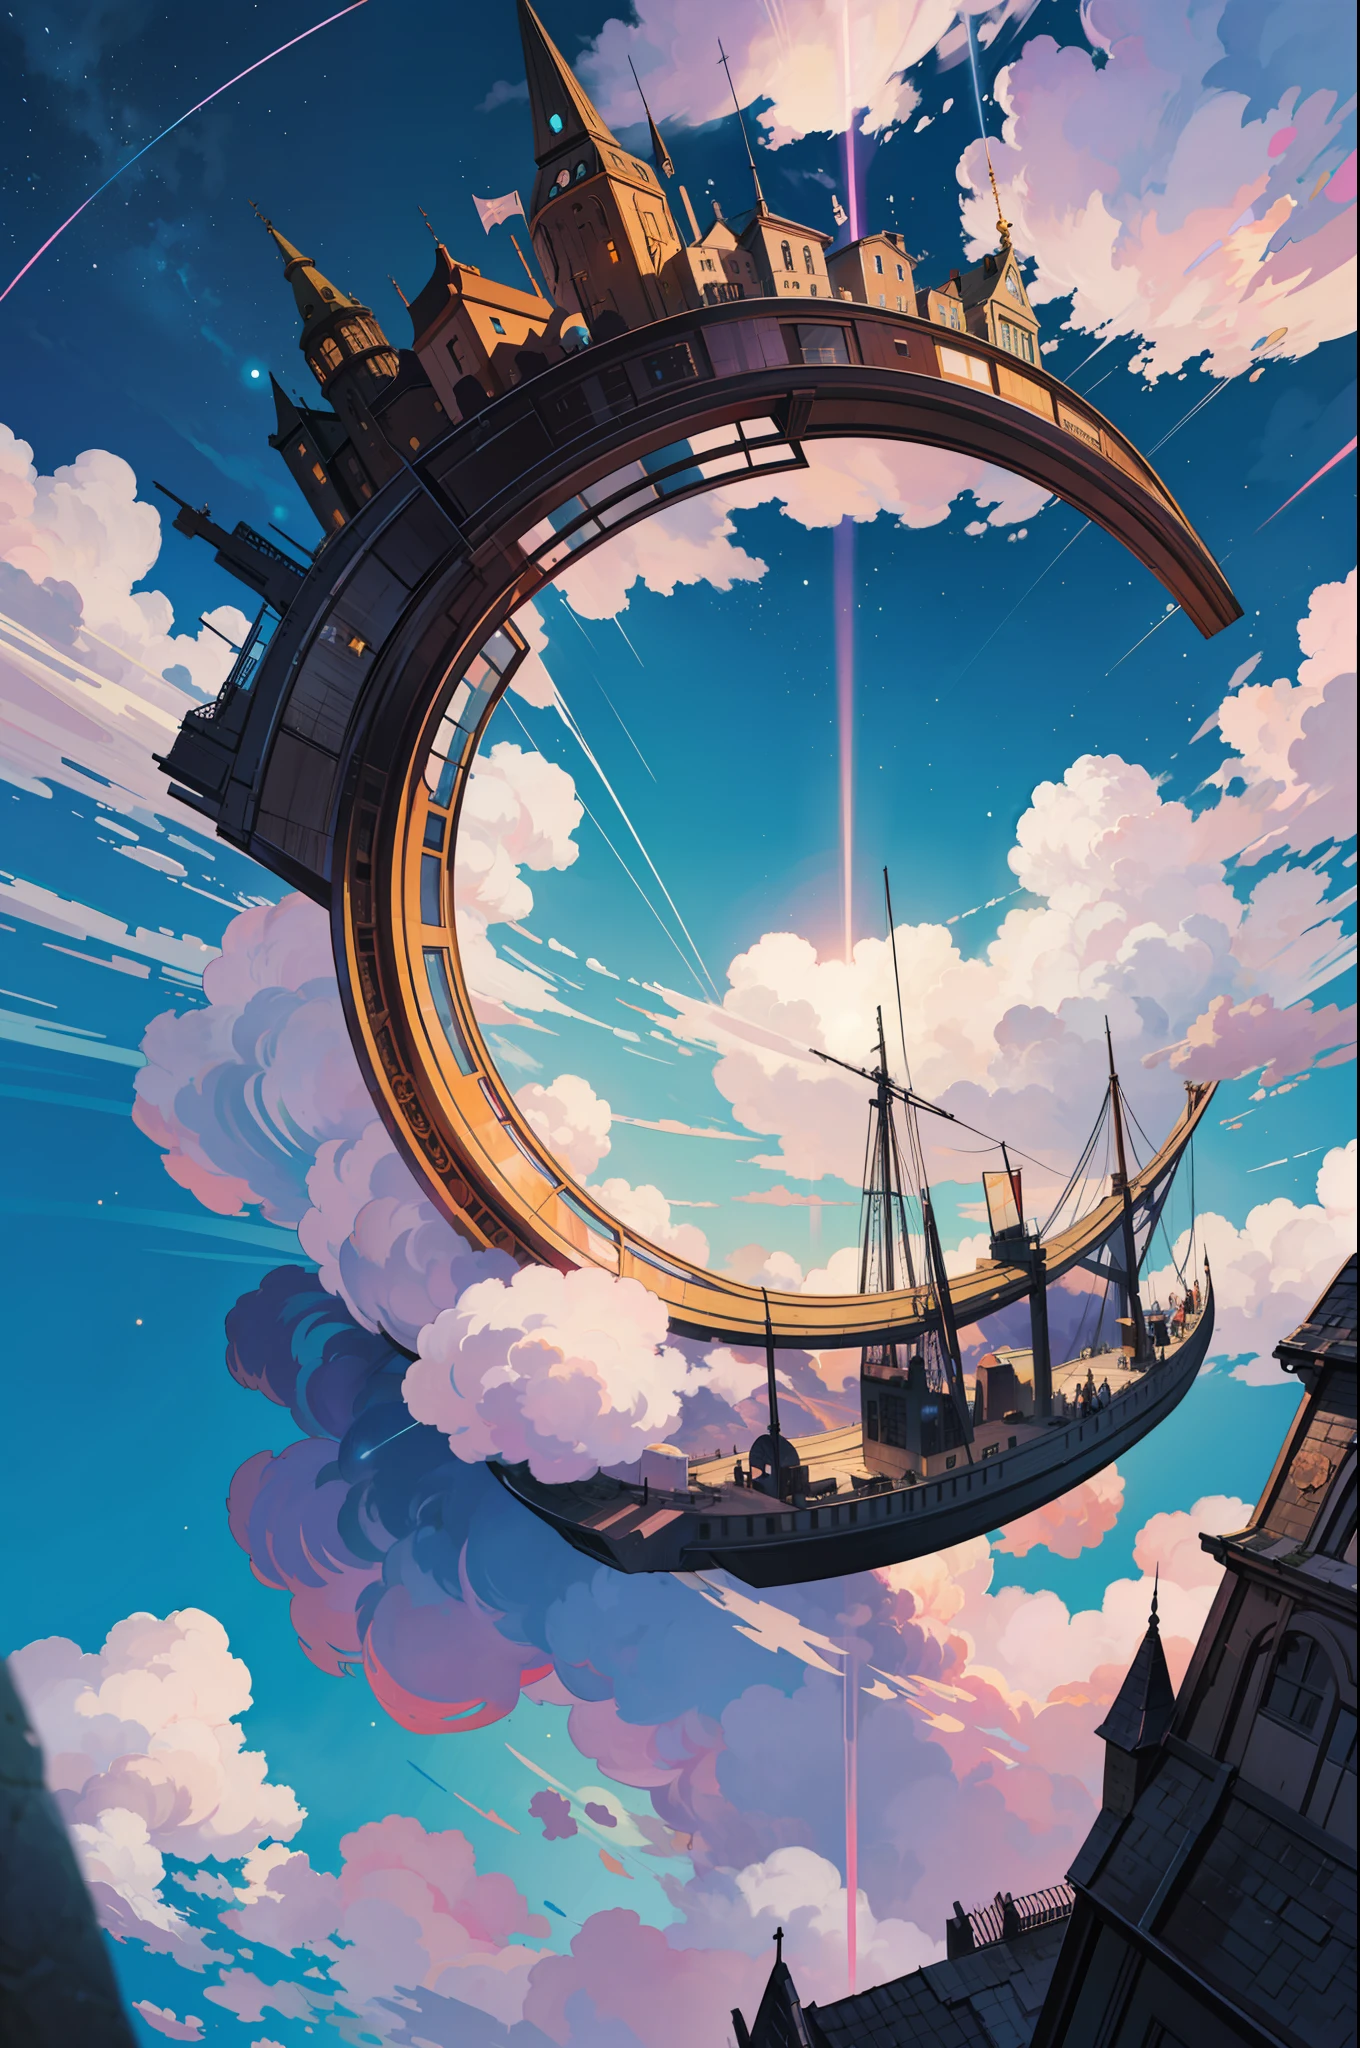 （levitating：1.5），（A huge double-ring steampunk city floating in space：1.3），（Illuminated futuristic steampunk city：1.4），（Thick clouds：1.4），（Estilo de Makoto Shinkai：1.4），Rejoice，Perfect quality，Clear focus（Clutter - home：0.8）， （tmasterpiece：1.2）， （realisticlying：1.2） ，（with light glowing：1.2）， （best qualtiy）， （detailed  starry sky：1.3） ，（complexdetails）， （8K）， （Detail meteor） ，（Sharp focus），（having fun），（Award-winning digital artwork：1.3） af （sketching：1.3），（with dynamism：1.3）,studiolight,Theme，looking from above, the space, afloat， --v 6